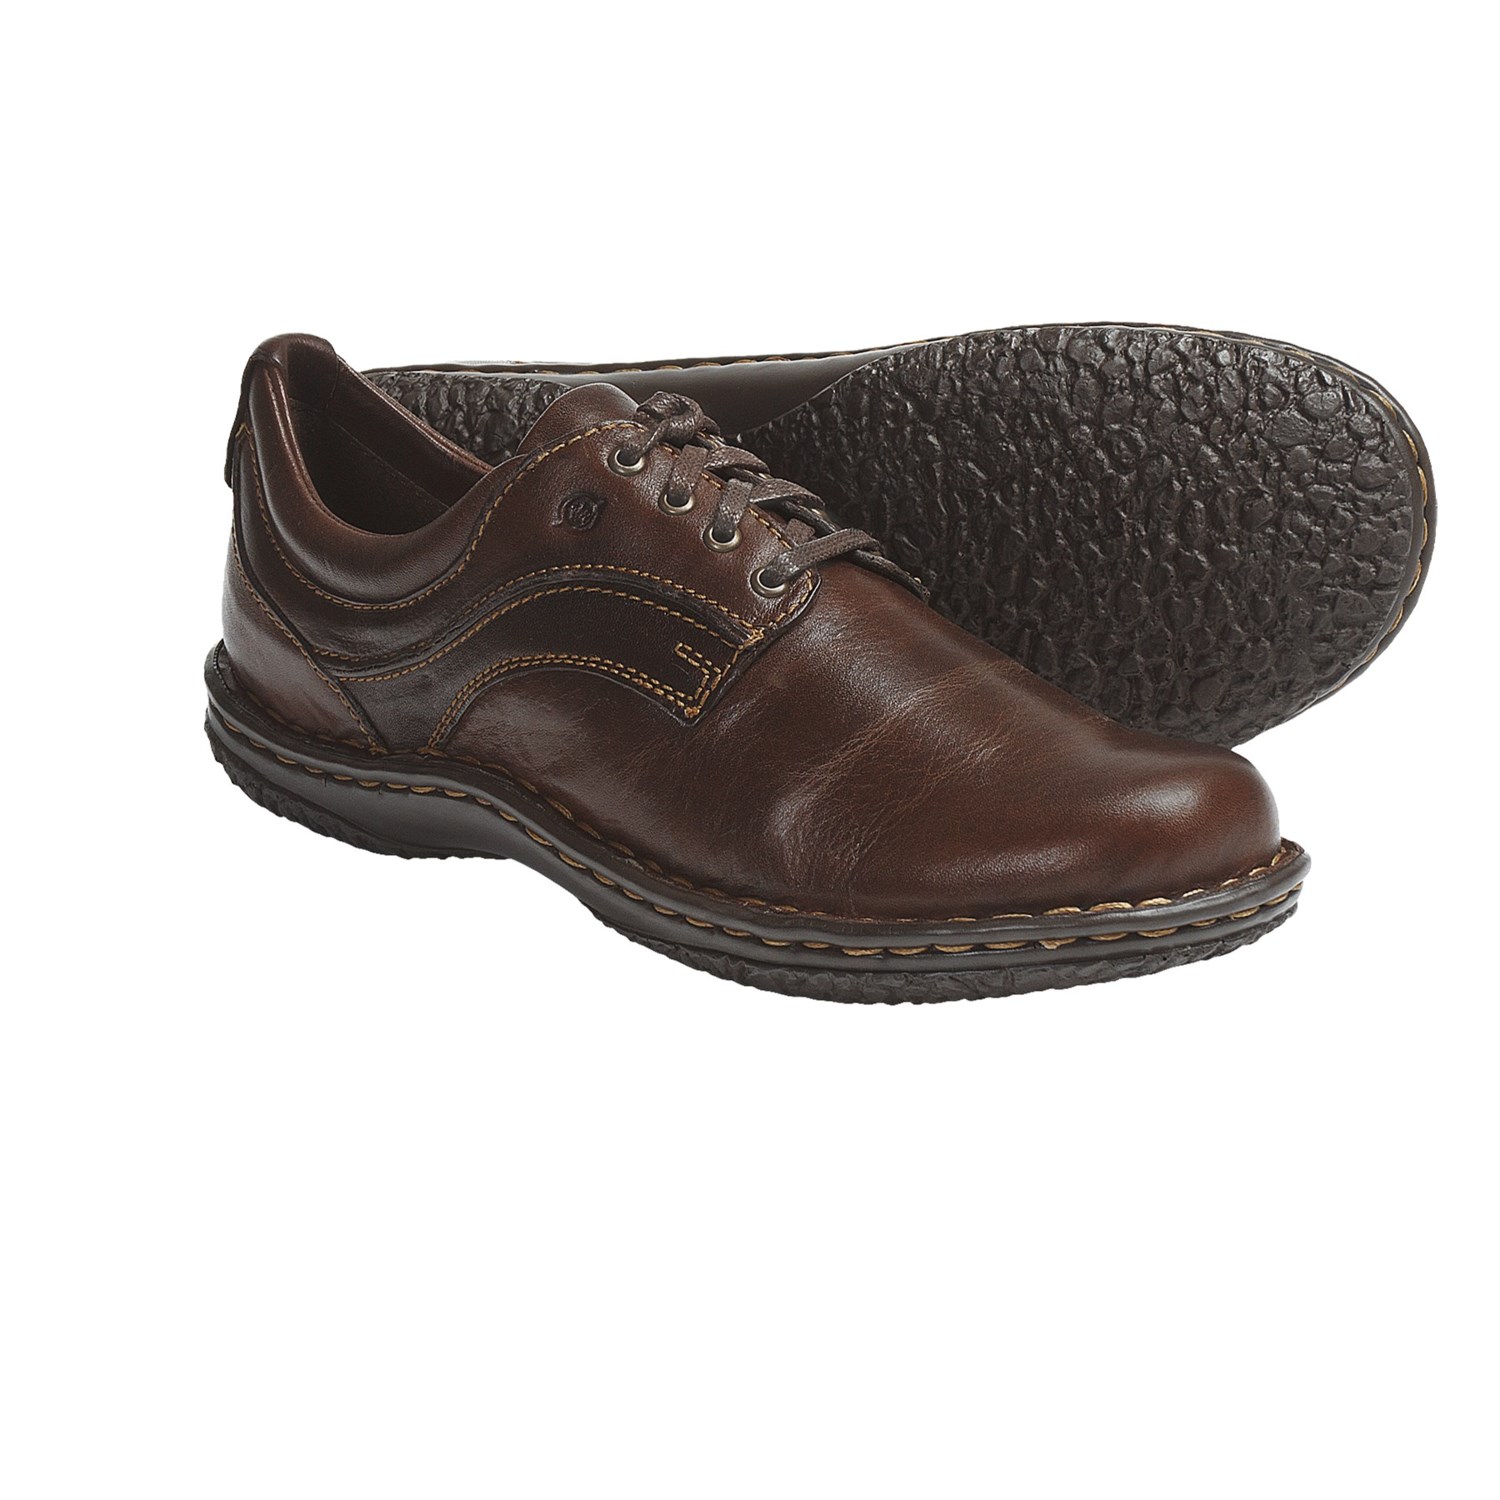 Born Jean Oxford Shoes - Leather (For Women) - Save 44%